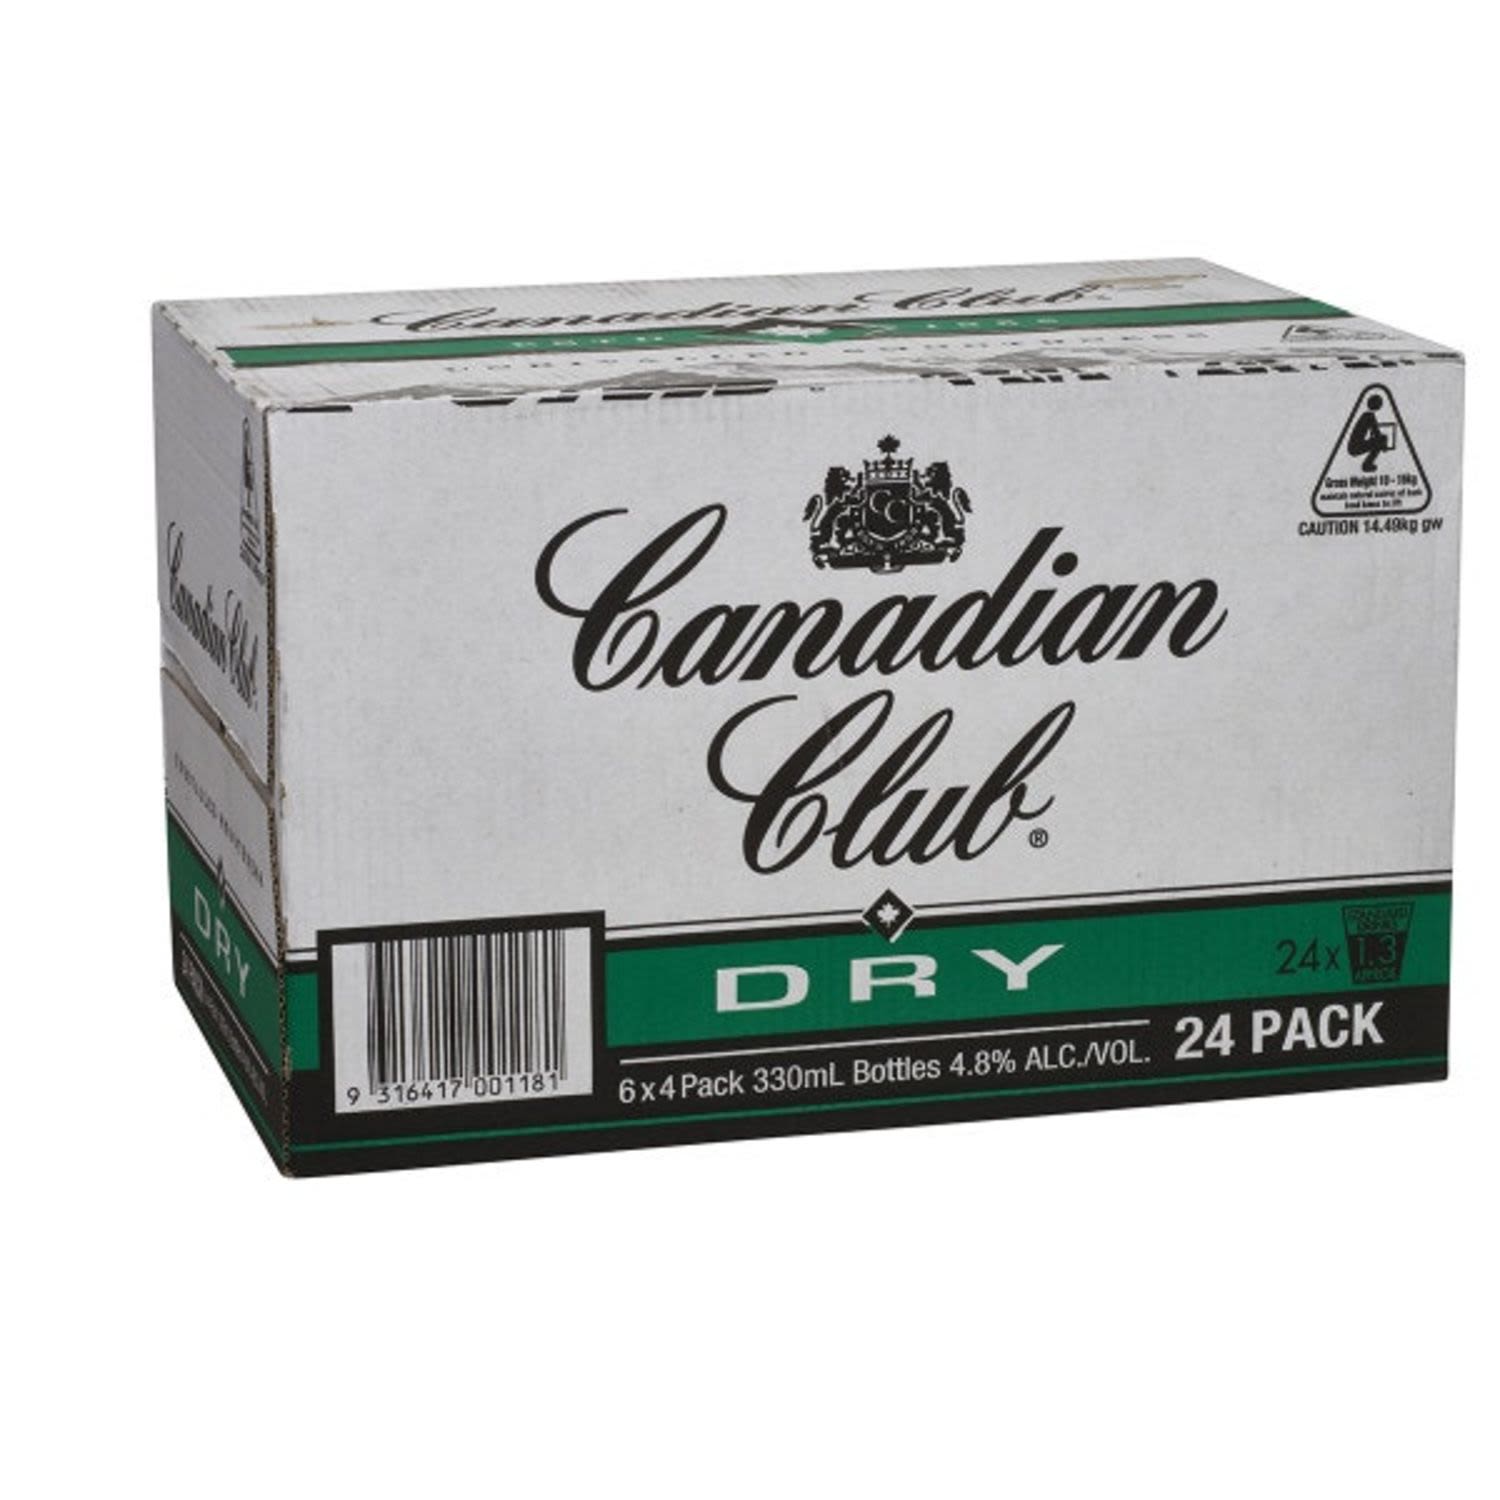 Canadian Club Whisky RTD comes as a blend of six-year-old Canadian Club and Dry Ginger Ale. Enjoy chilled or poured over ice for the ultimate refreshment.<br /> <br />Alcohol Volume: 4.80%<br /><br />Pack Format: 24 Pack<br /><br />Standard Drinks: 1.3</br /><br />Pack Type: Bottle<br />